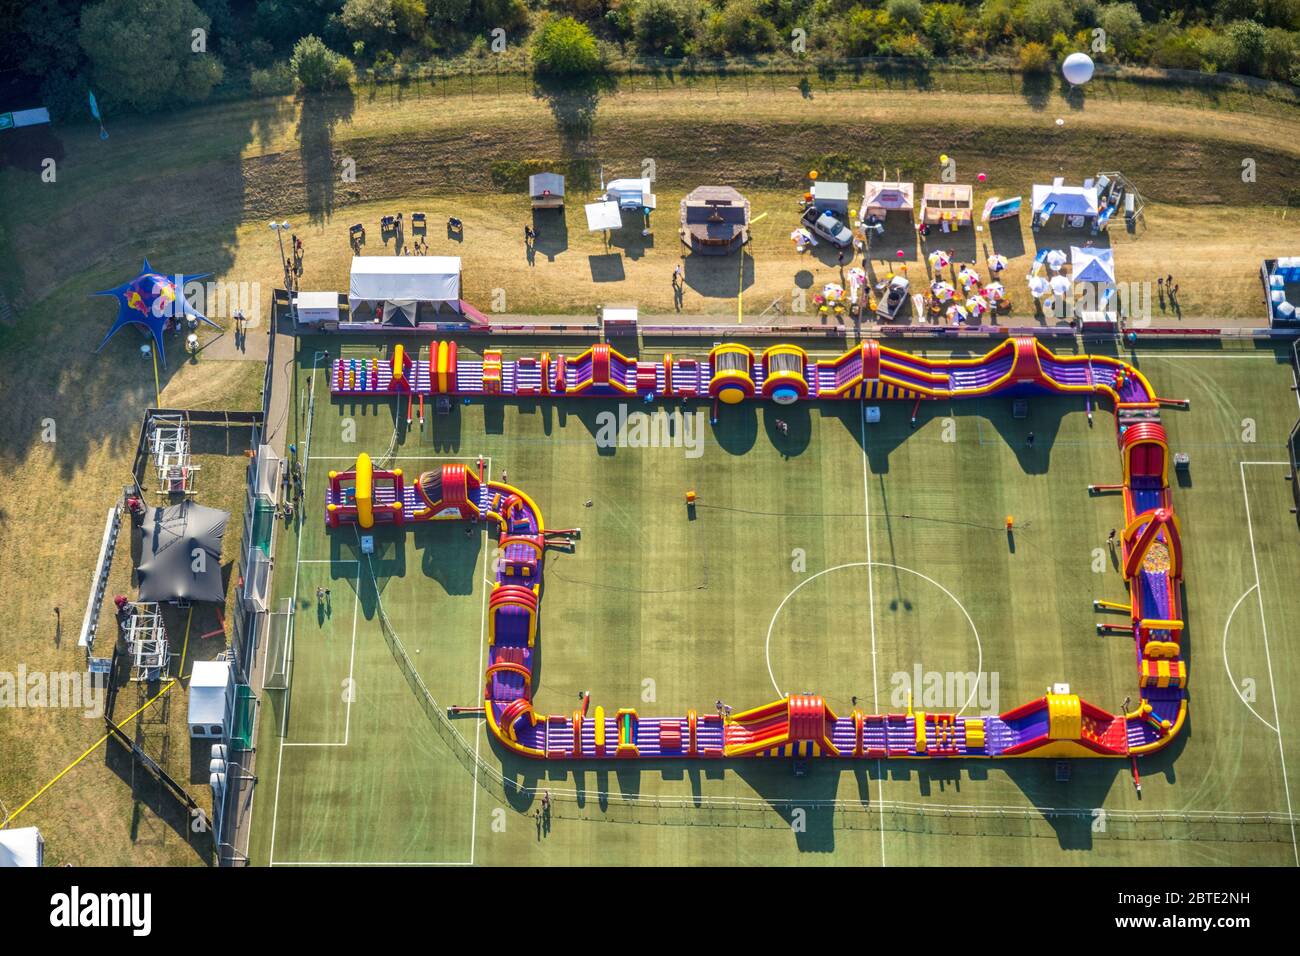 Aerial View Of Festival Grounds High Resolution Stock Photography and  Images - Alamy